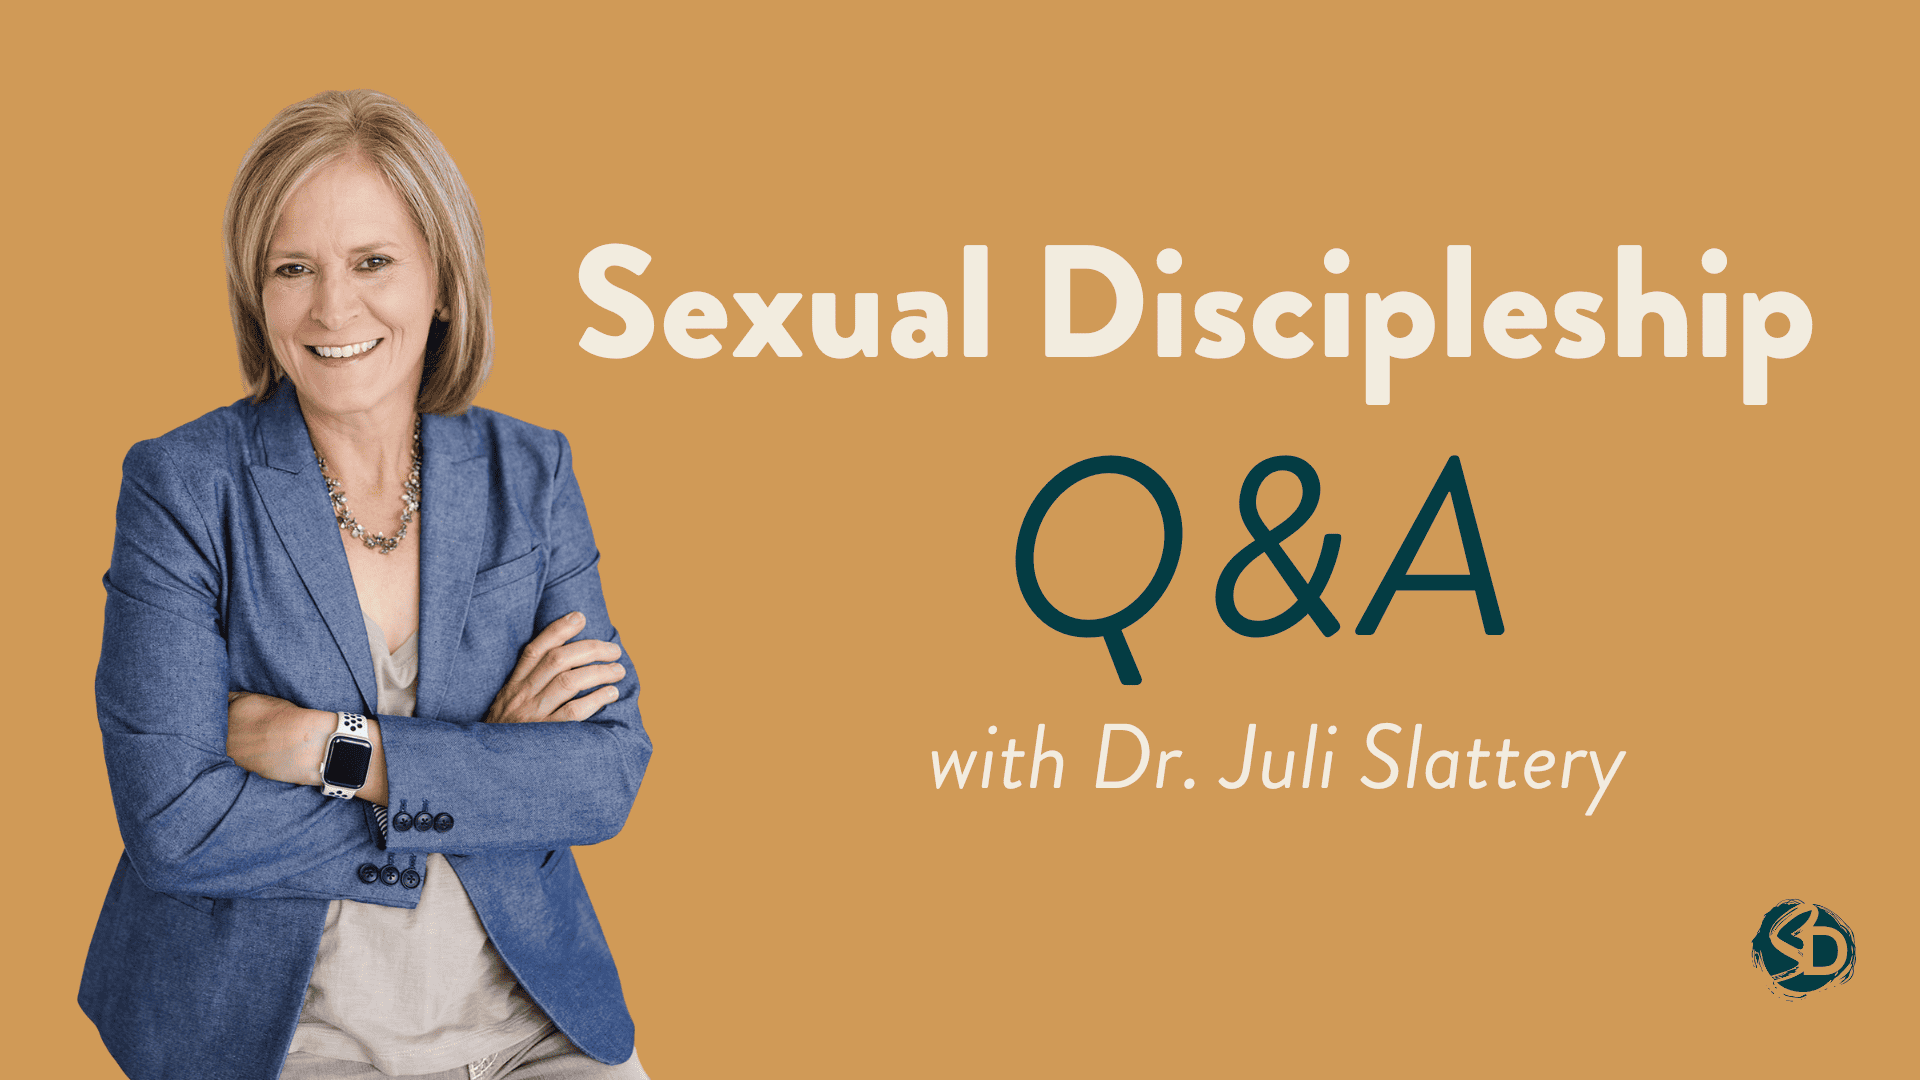 Q&A: How Can an Environment of Openness Around Biblical Sexuality be Promoted Among Ministry Leadership?